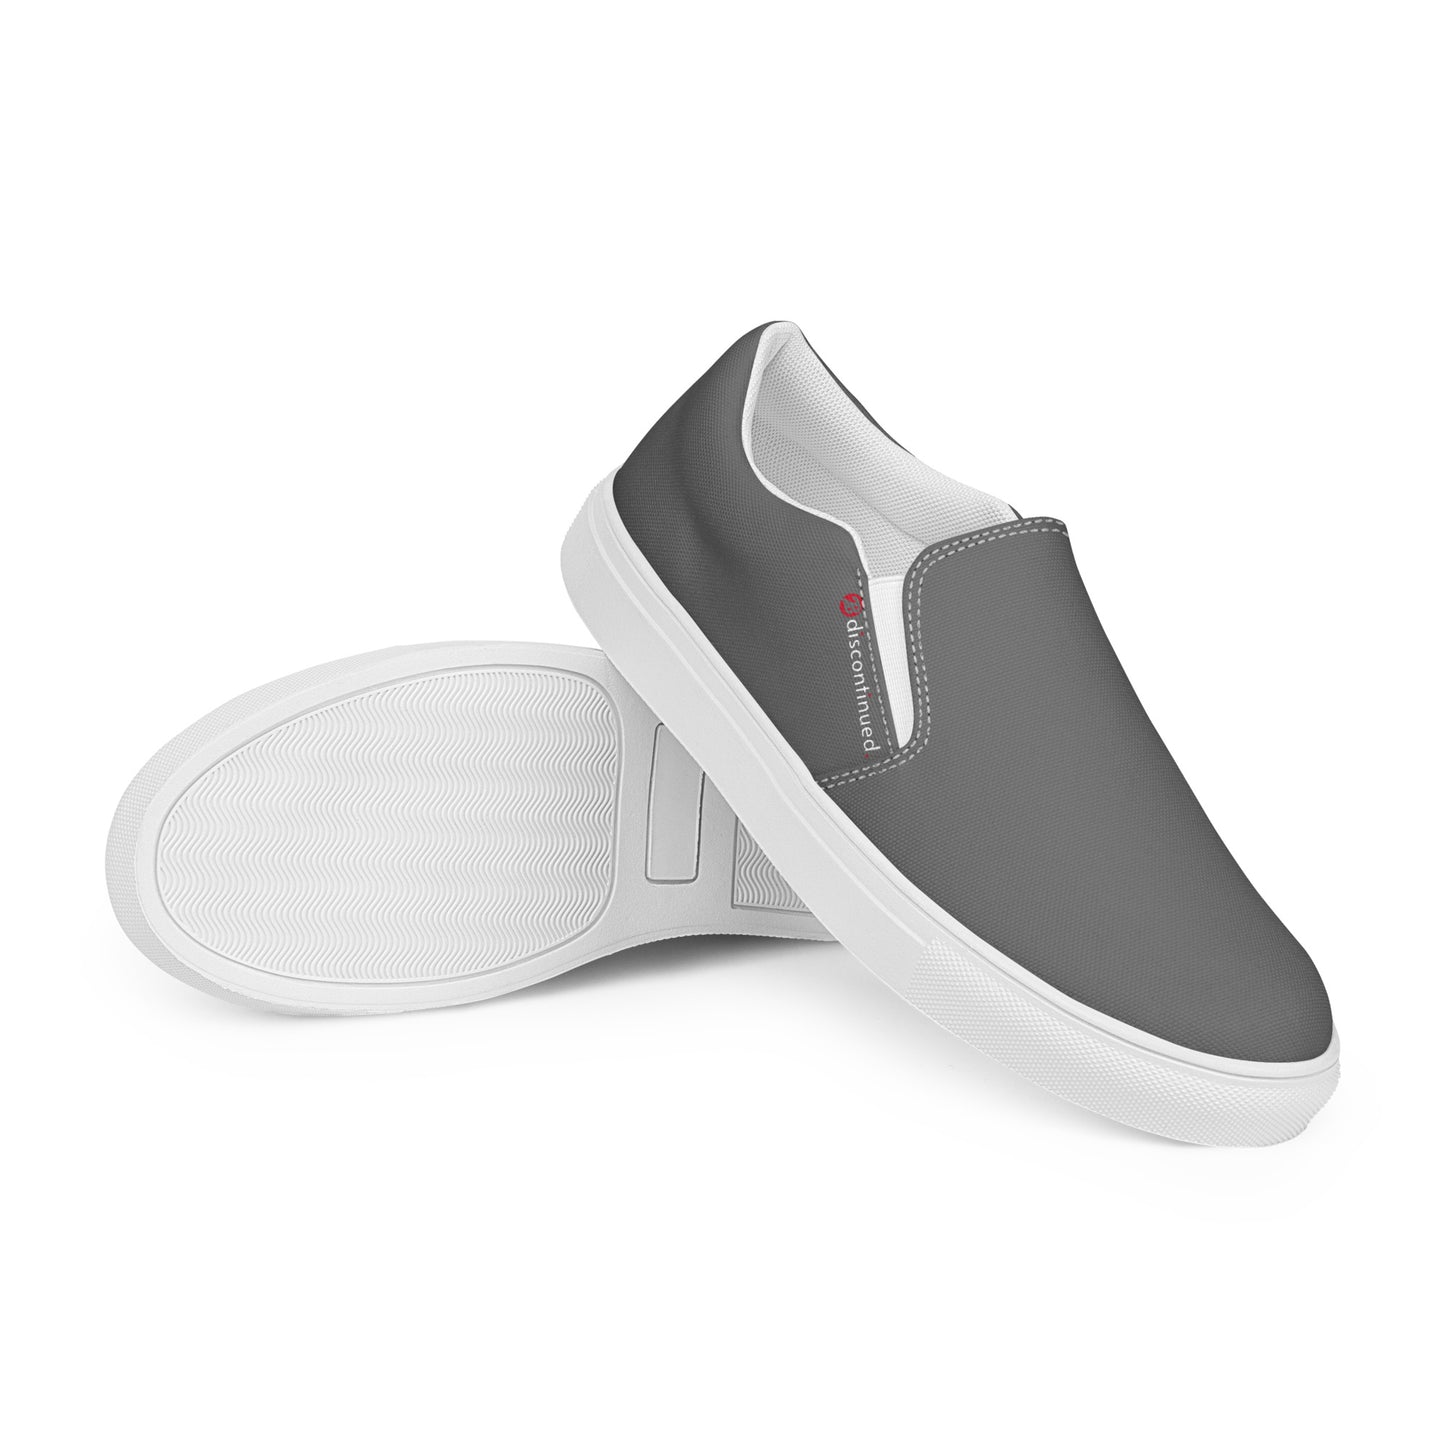 2Bdiscontinued. men’s slip-on canvas shoes gry